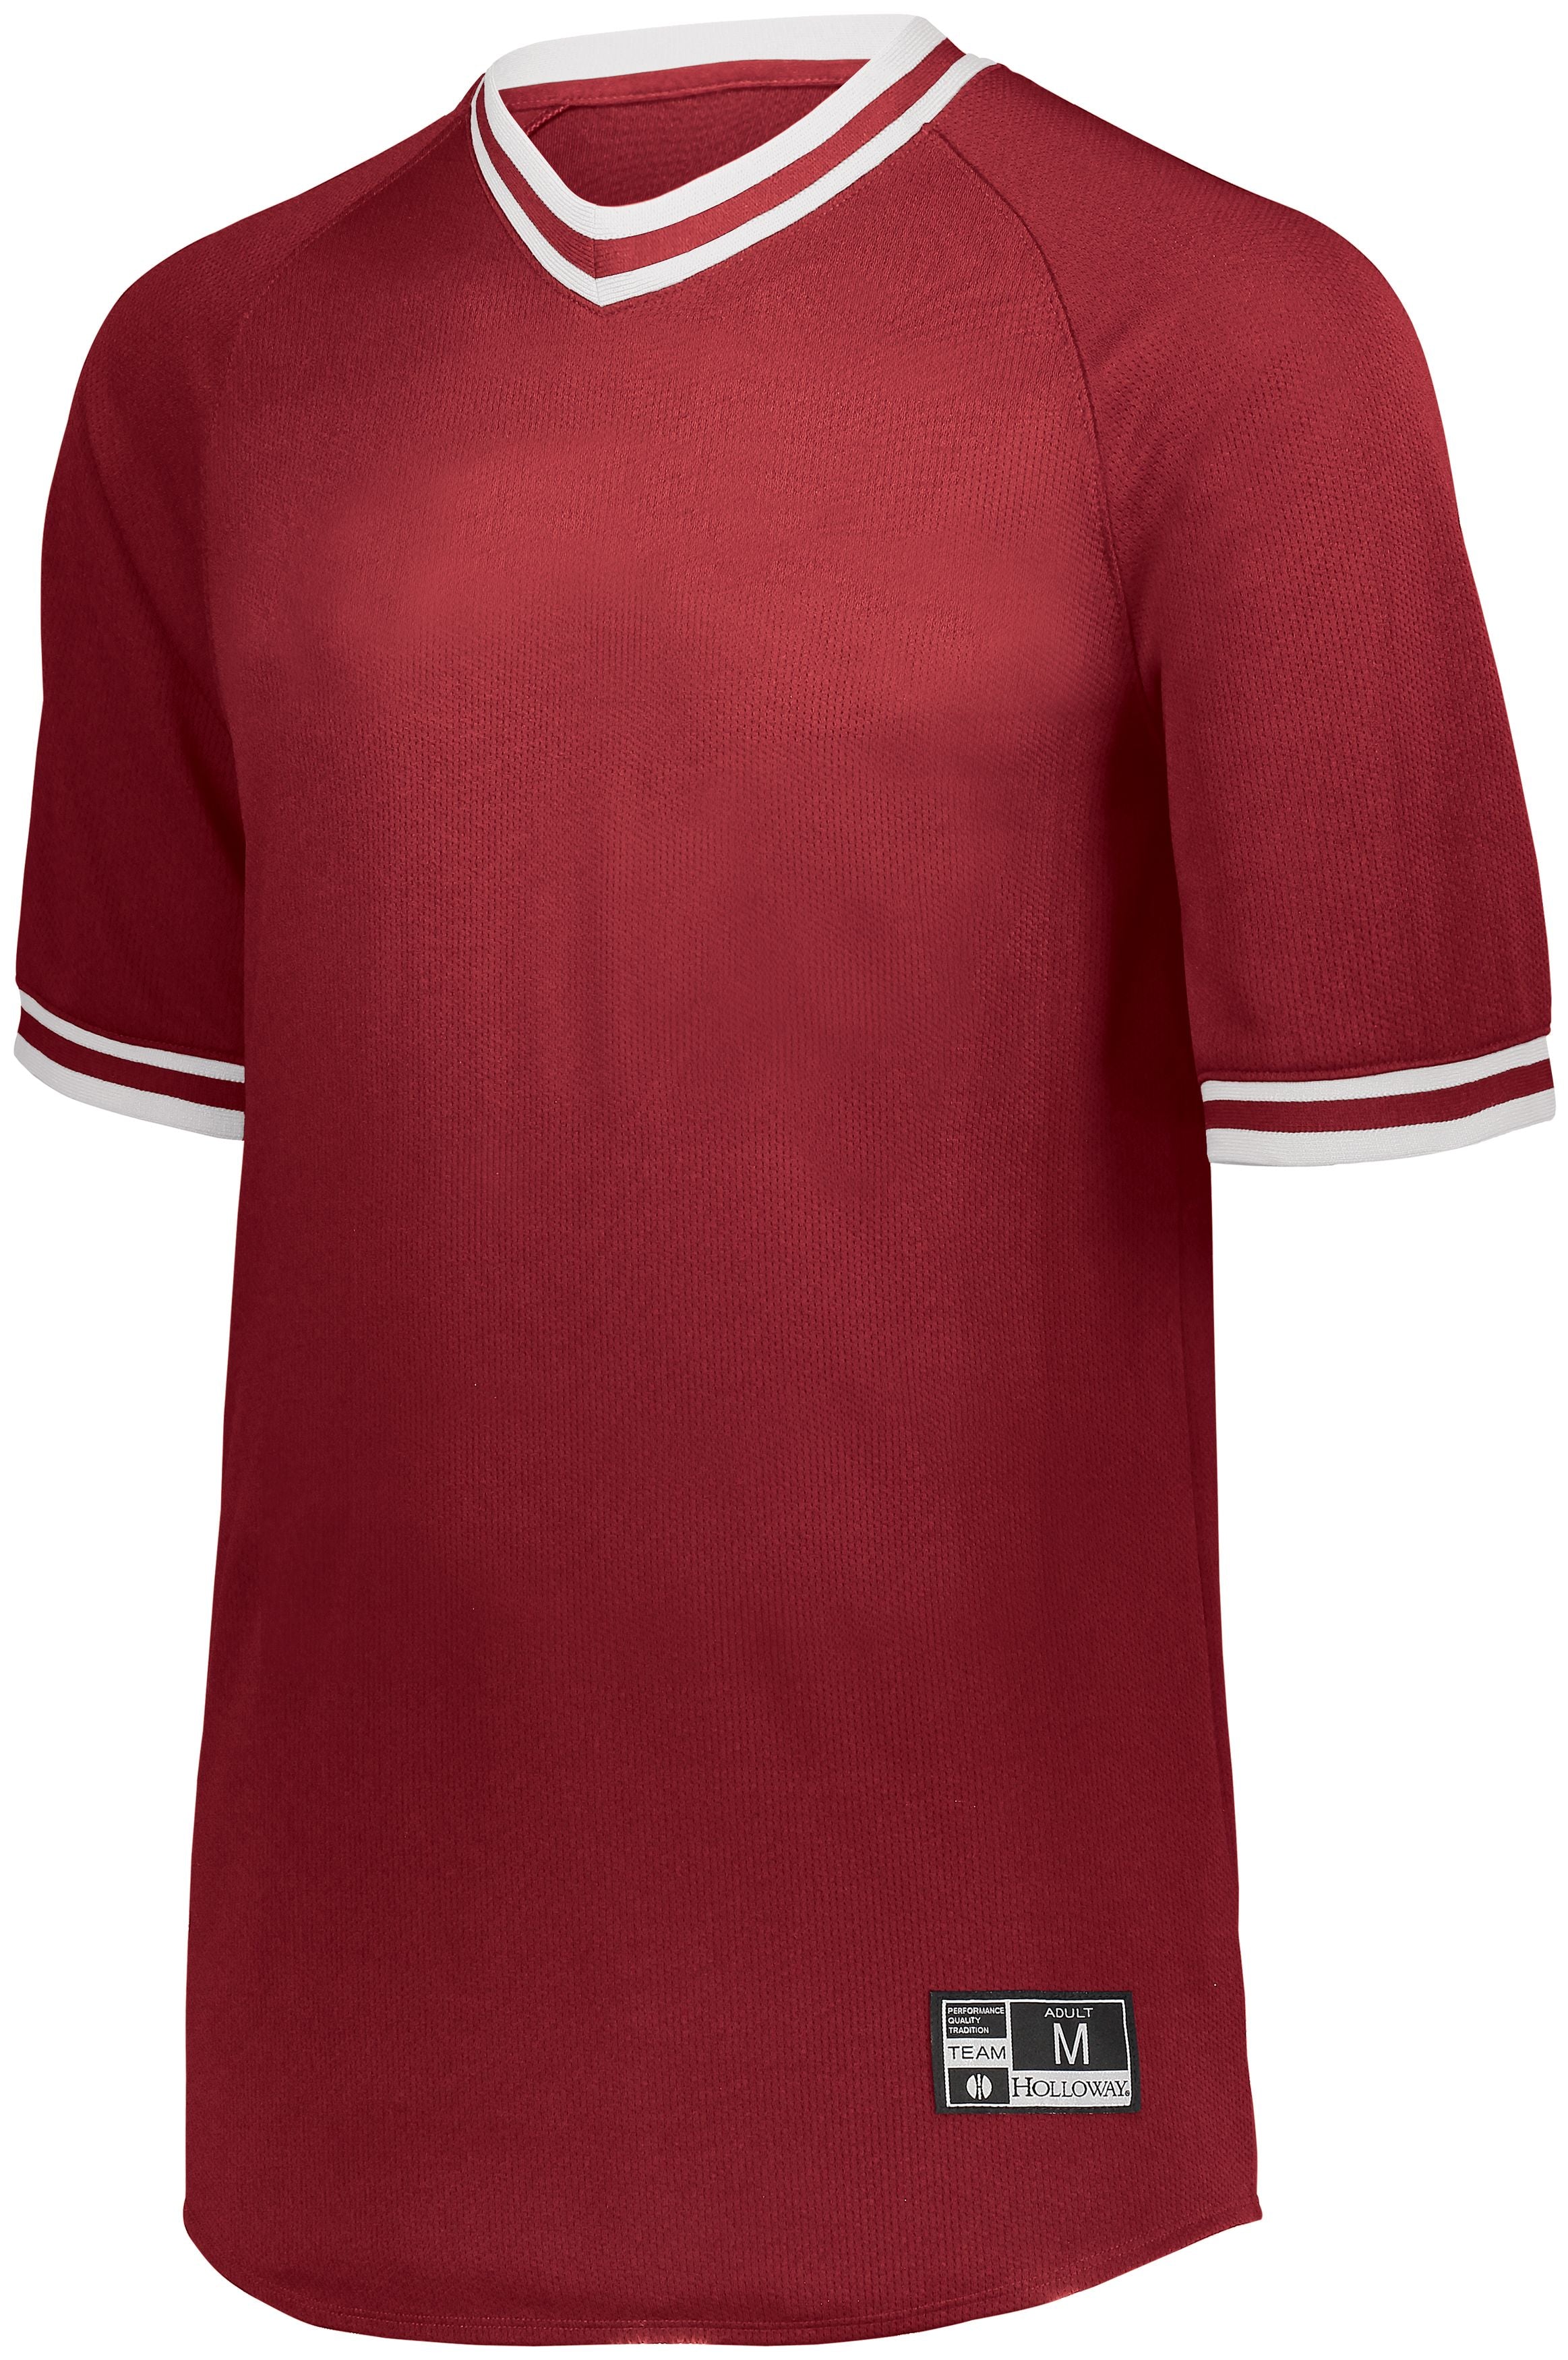 Holloway Retro V-Neck Baseball Jersey in Scarlet/White  -Part of the Adult, Adult-Jersey, Baseball, Holloway, Shirts, All-Sports, All-Sports-1 product lines at KanaleyCreations.com